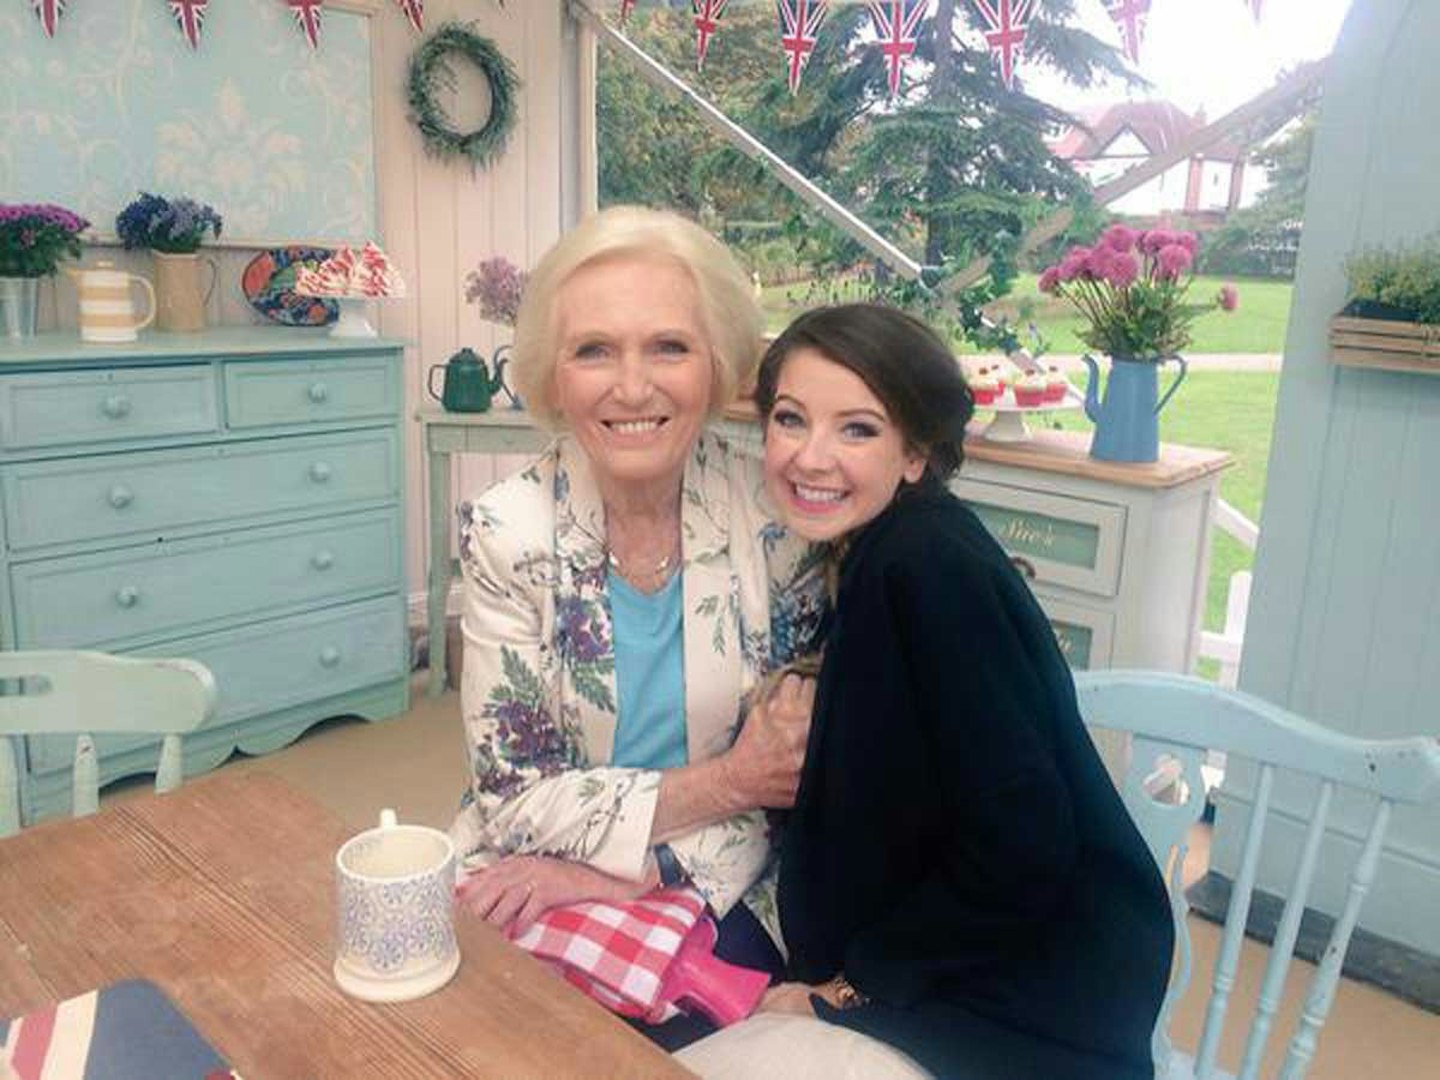 Zoella with Mary Berry [Instagram]